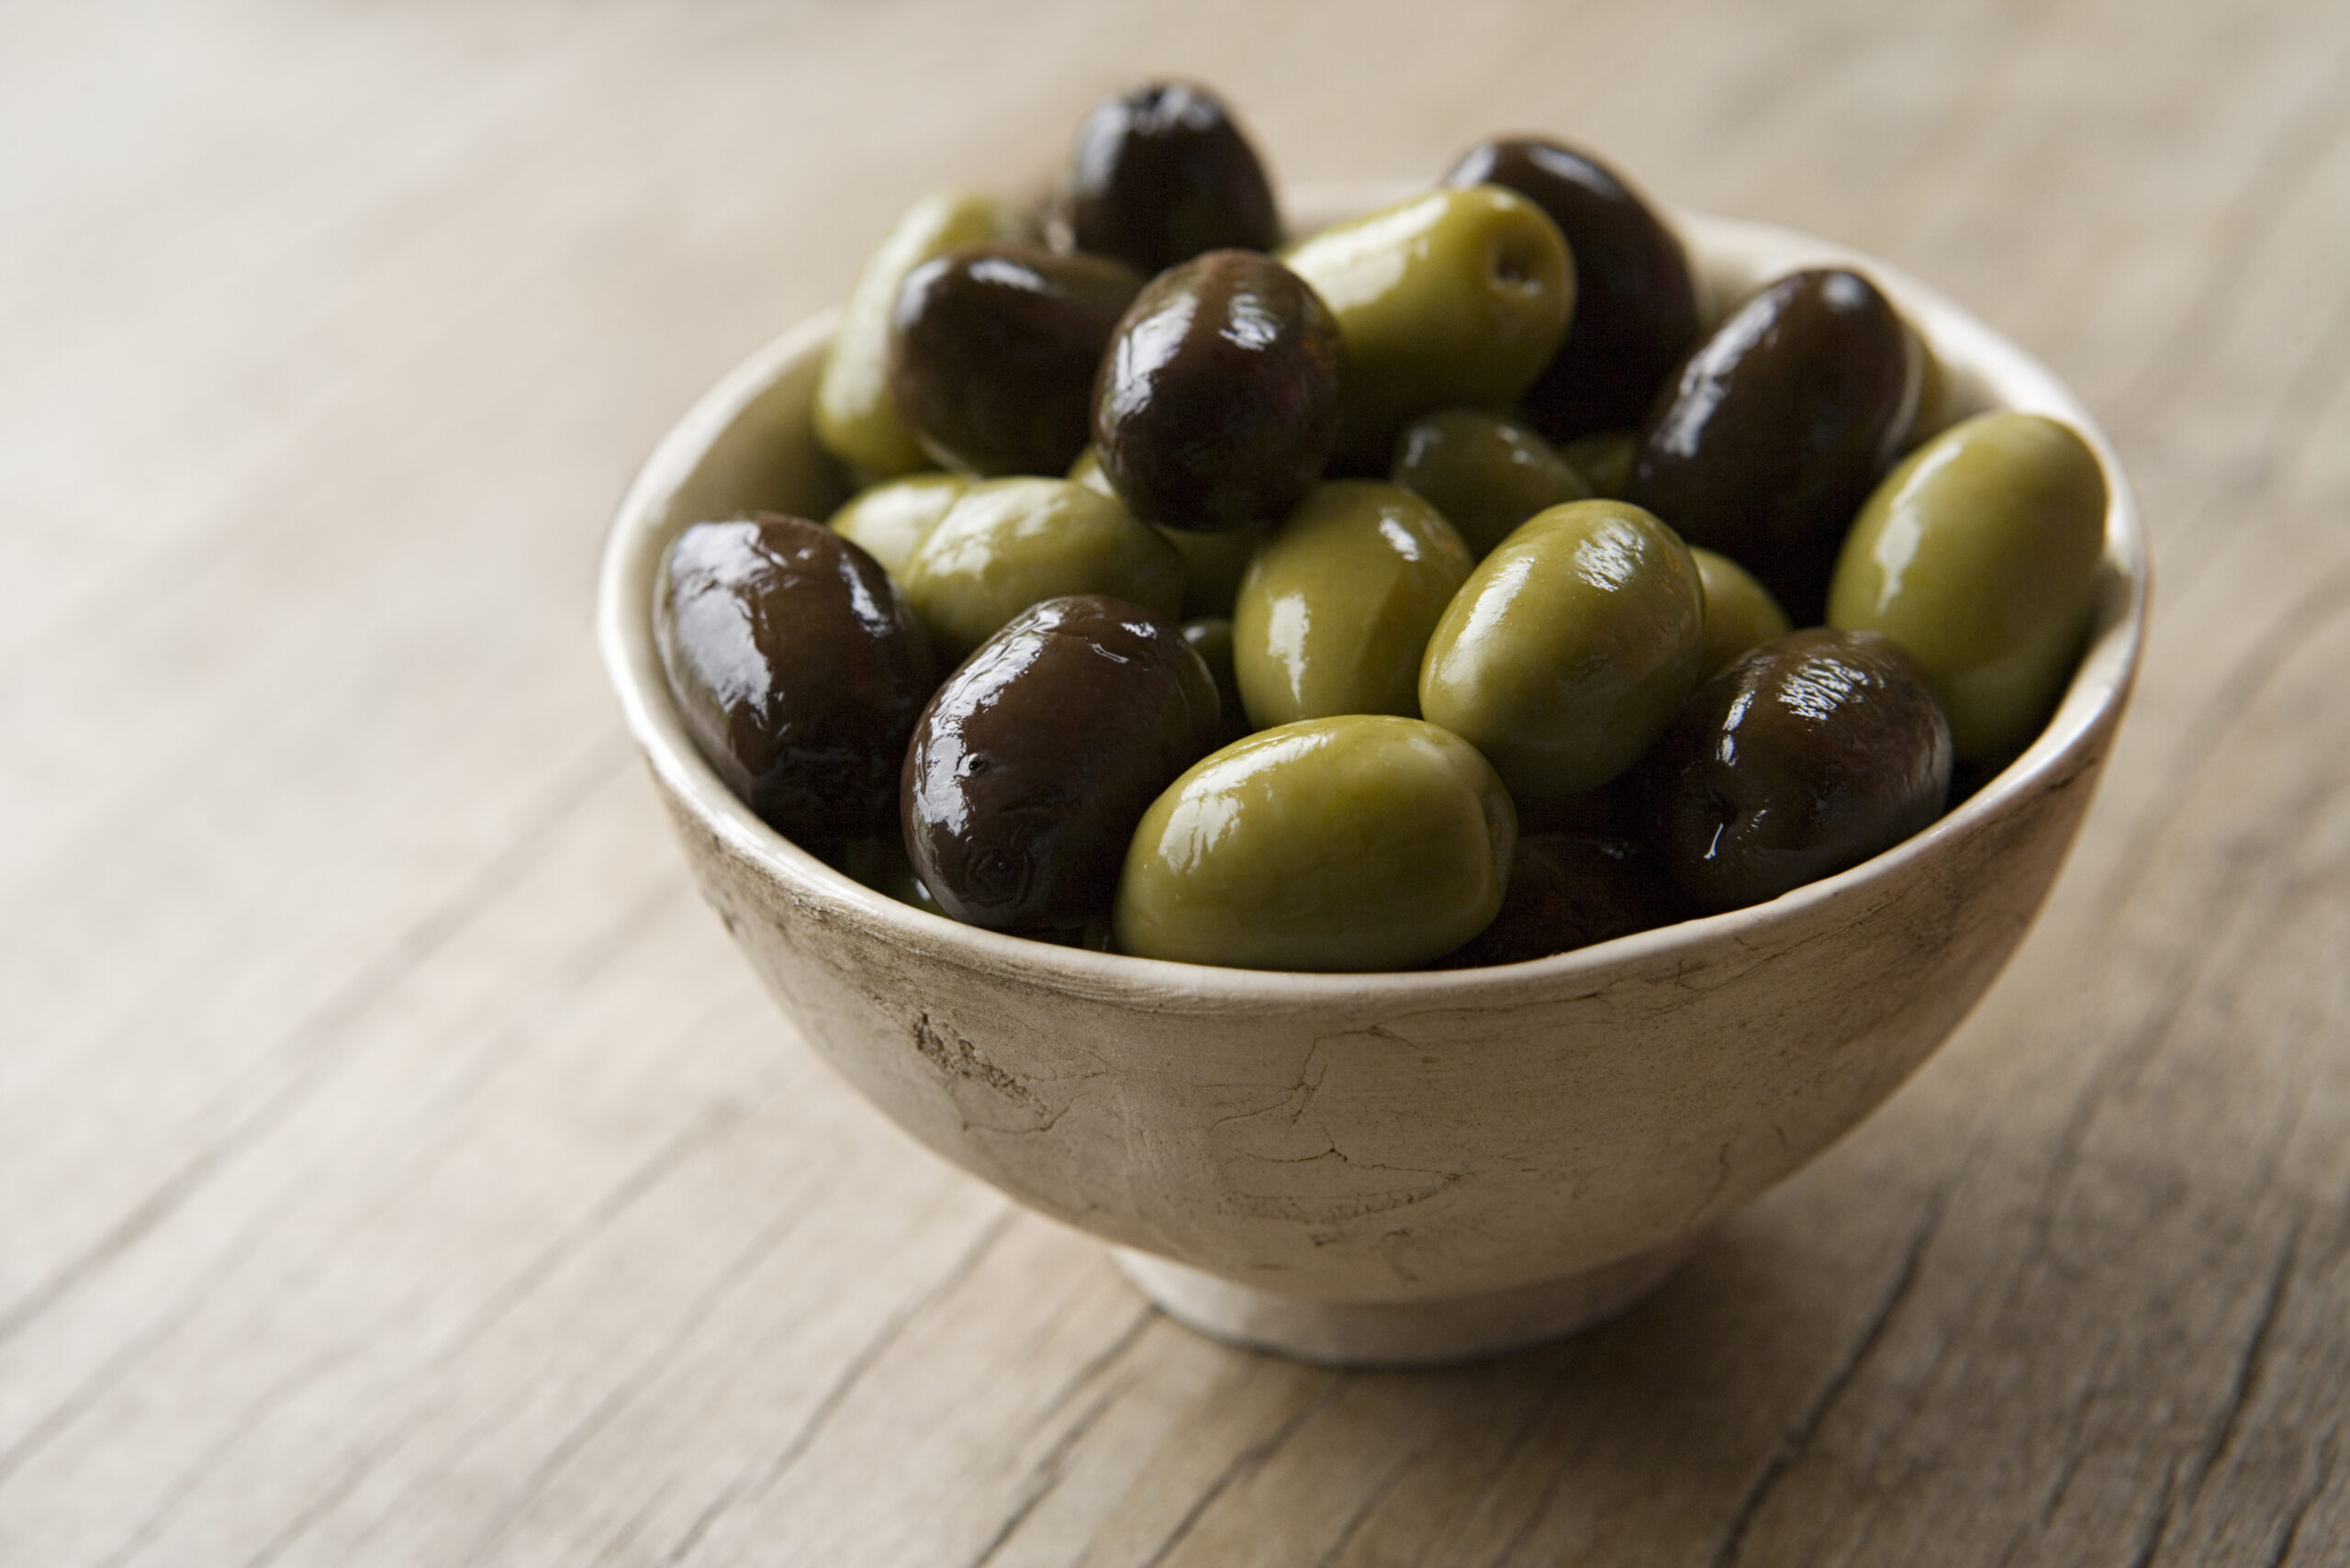 Green and Black Olives